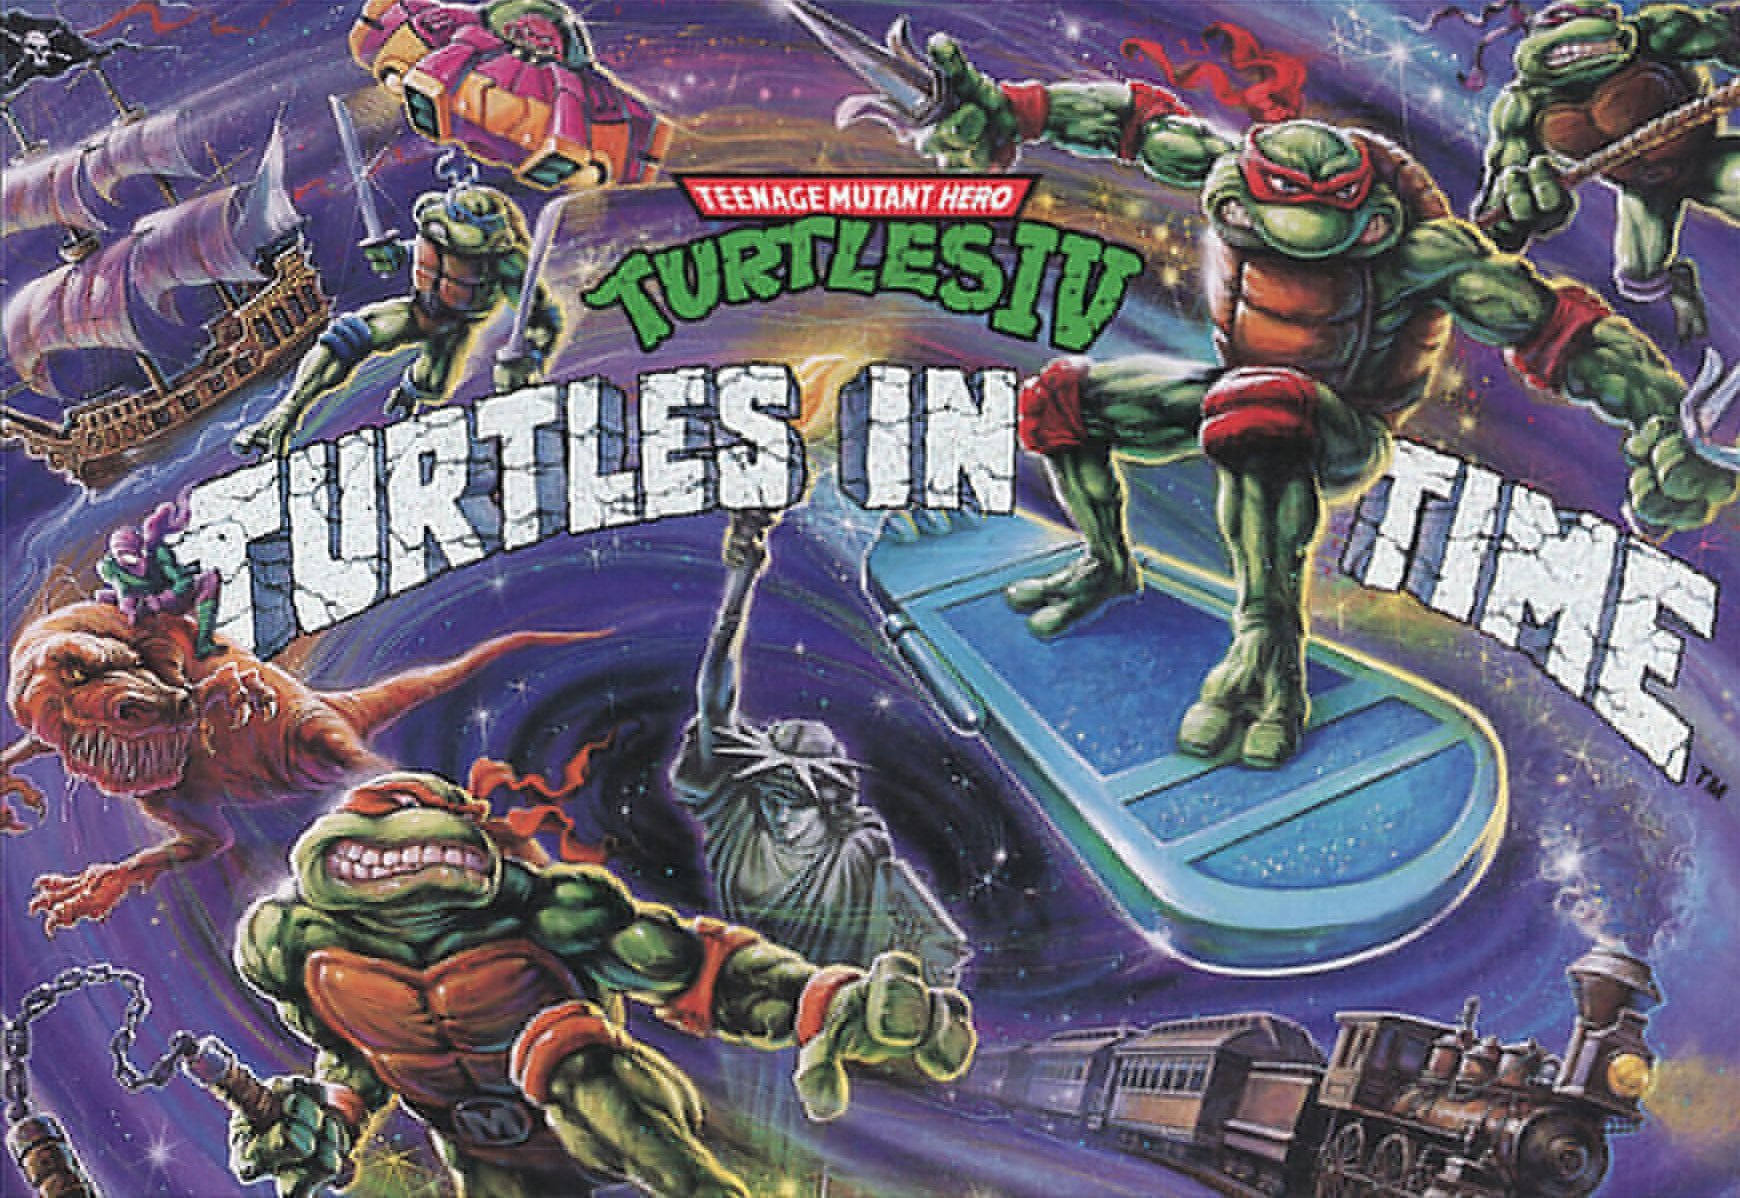 More information about "TMNT IV: Turtles in Time Retrospective"